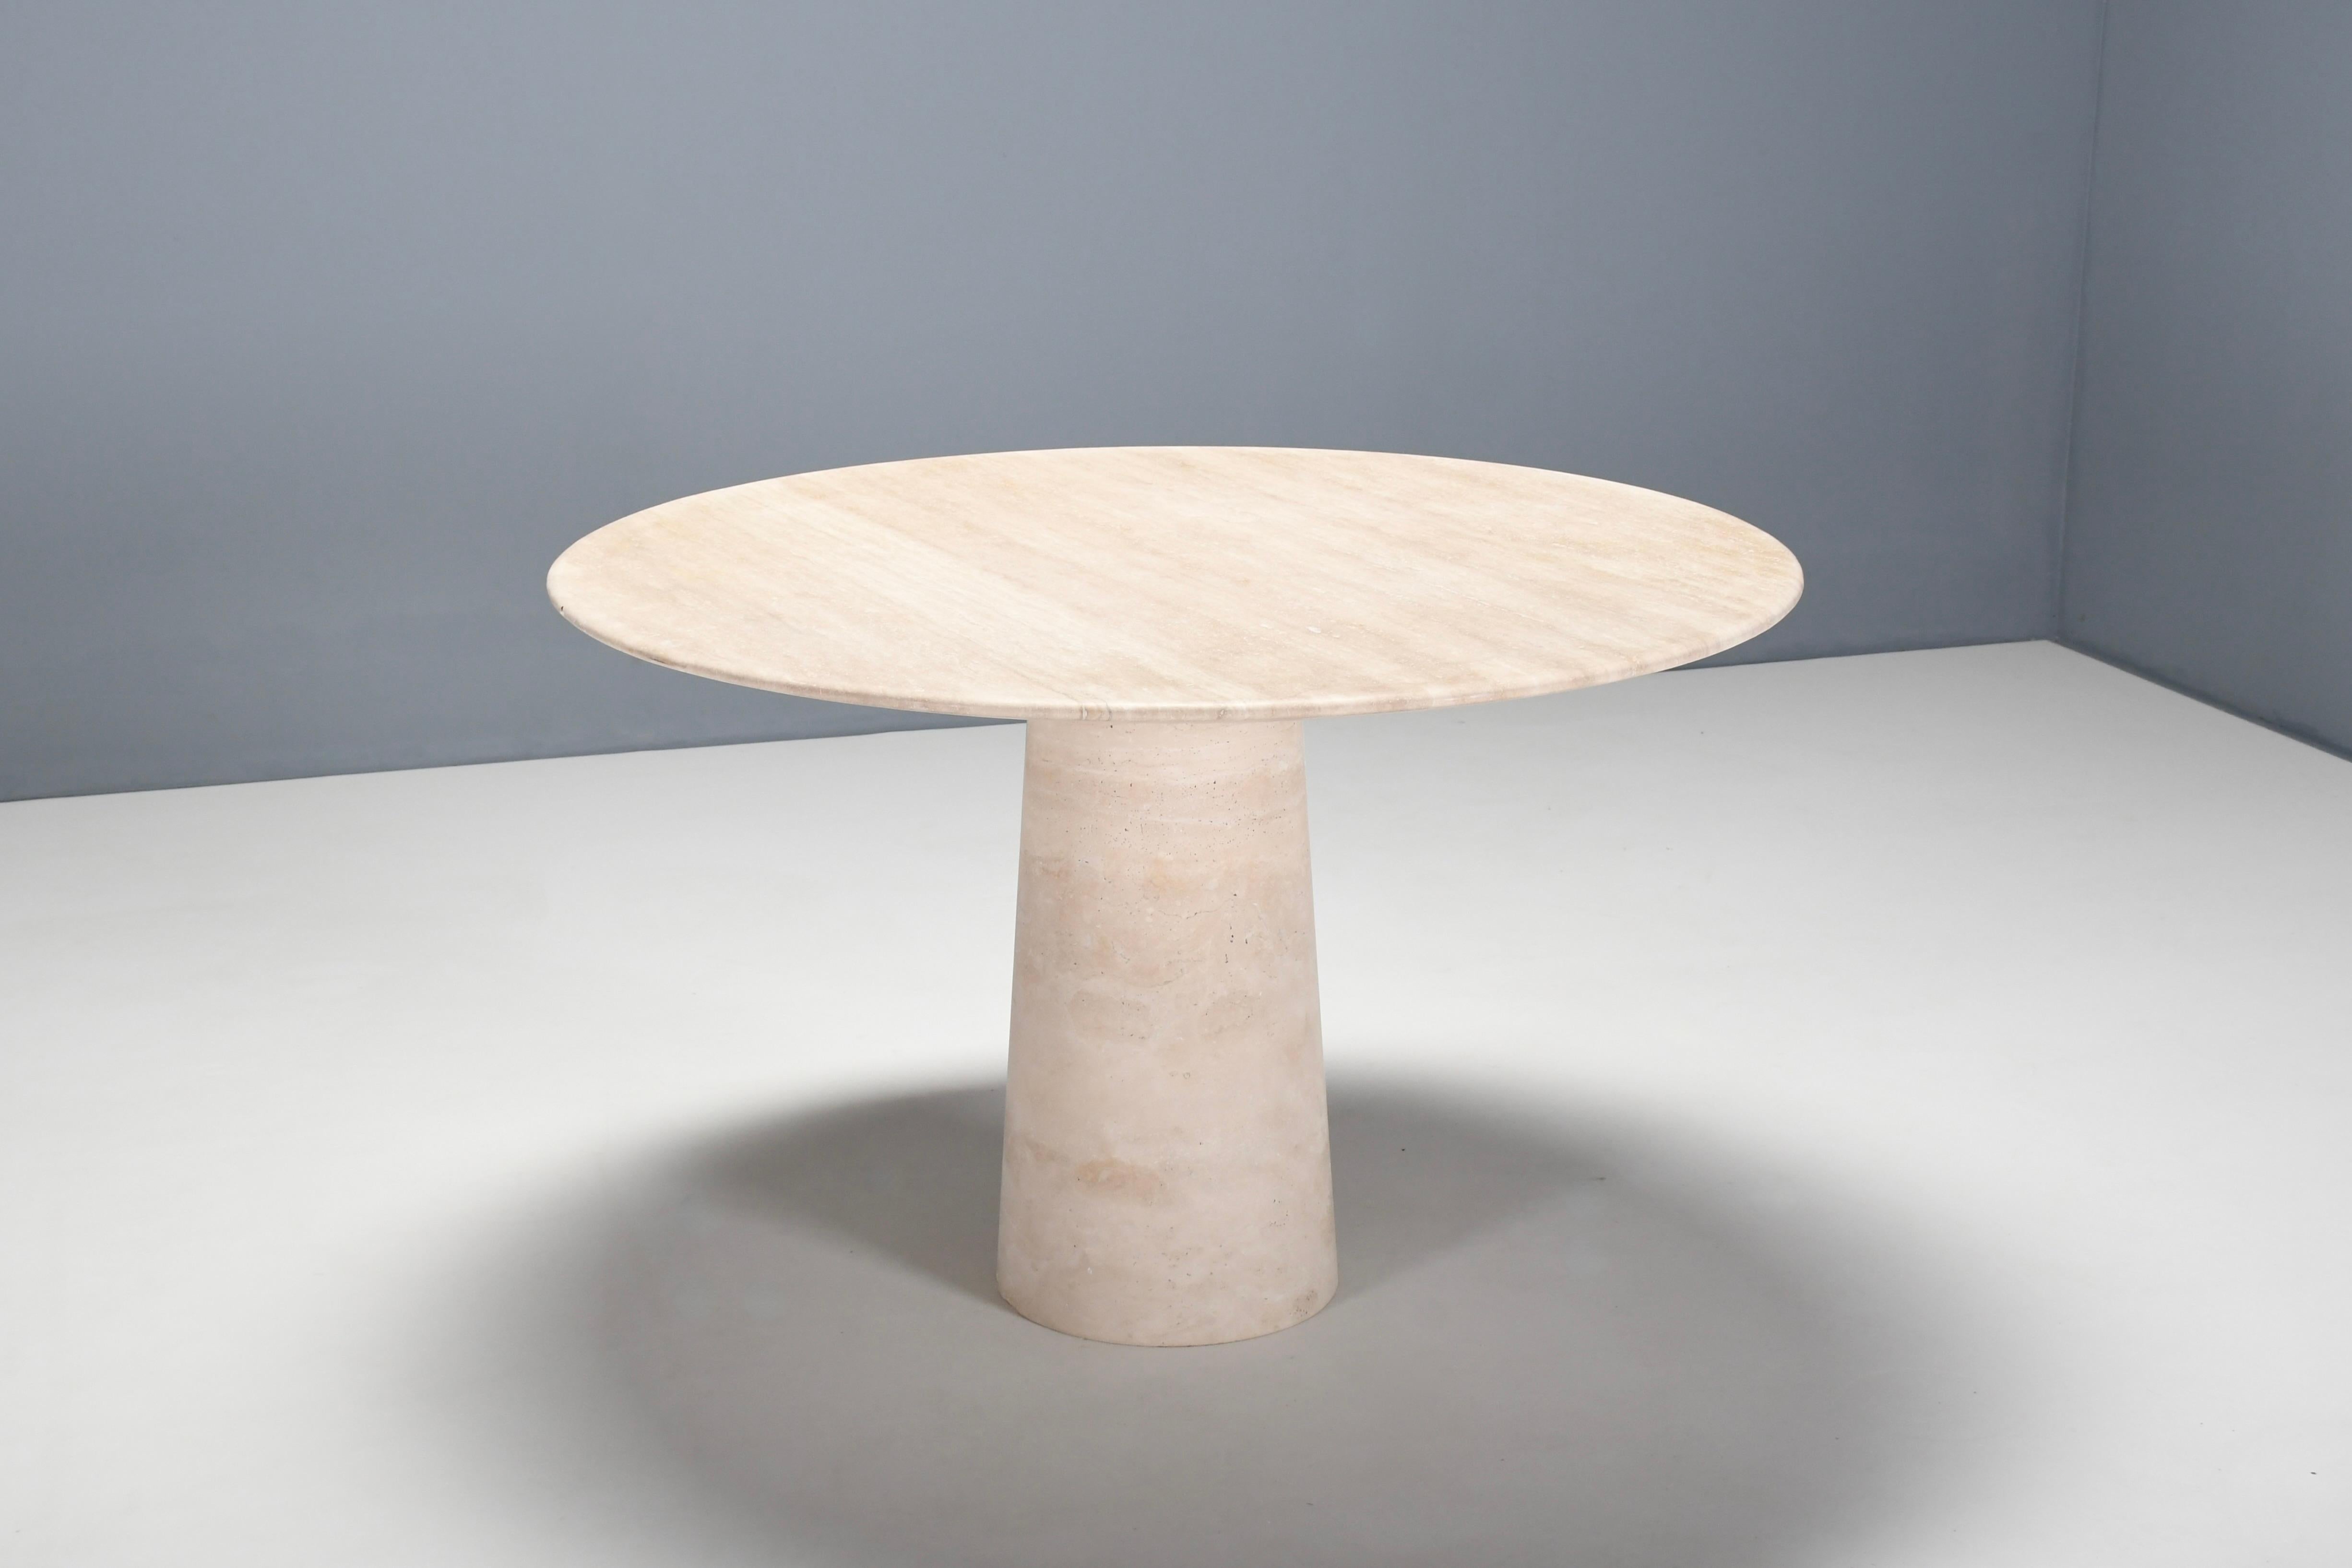 Natural Italian travertine marble dining table in very good condition.

Thick travertine top in variegated tones of beige and brown. 

The top rests on a round, conical shaped pedestal base also made of travertine. 

The top is securely connected to